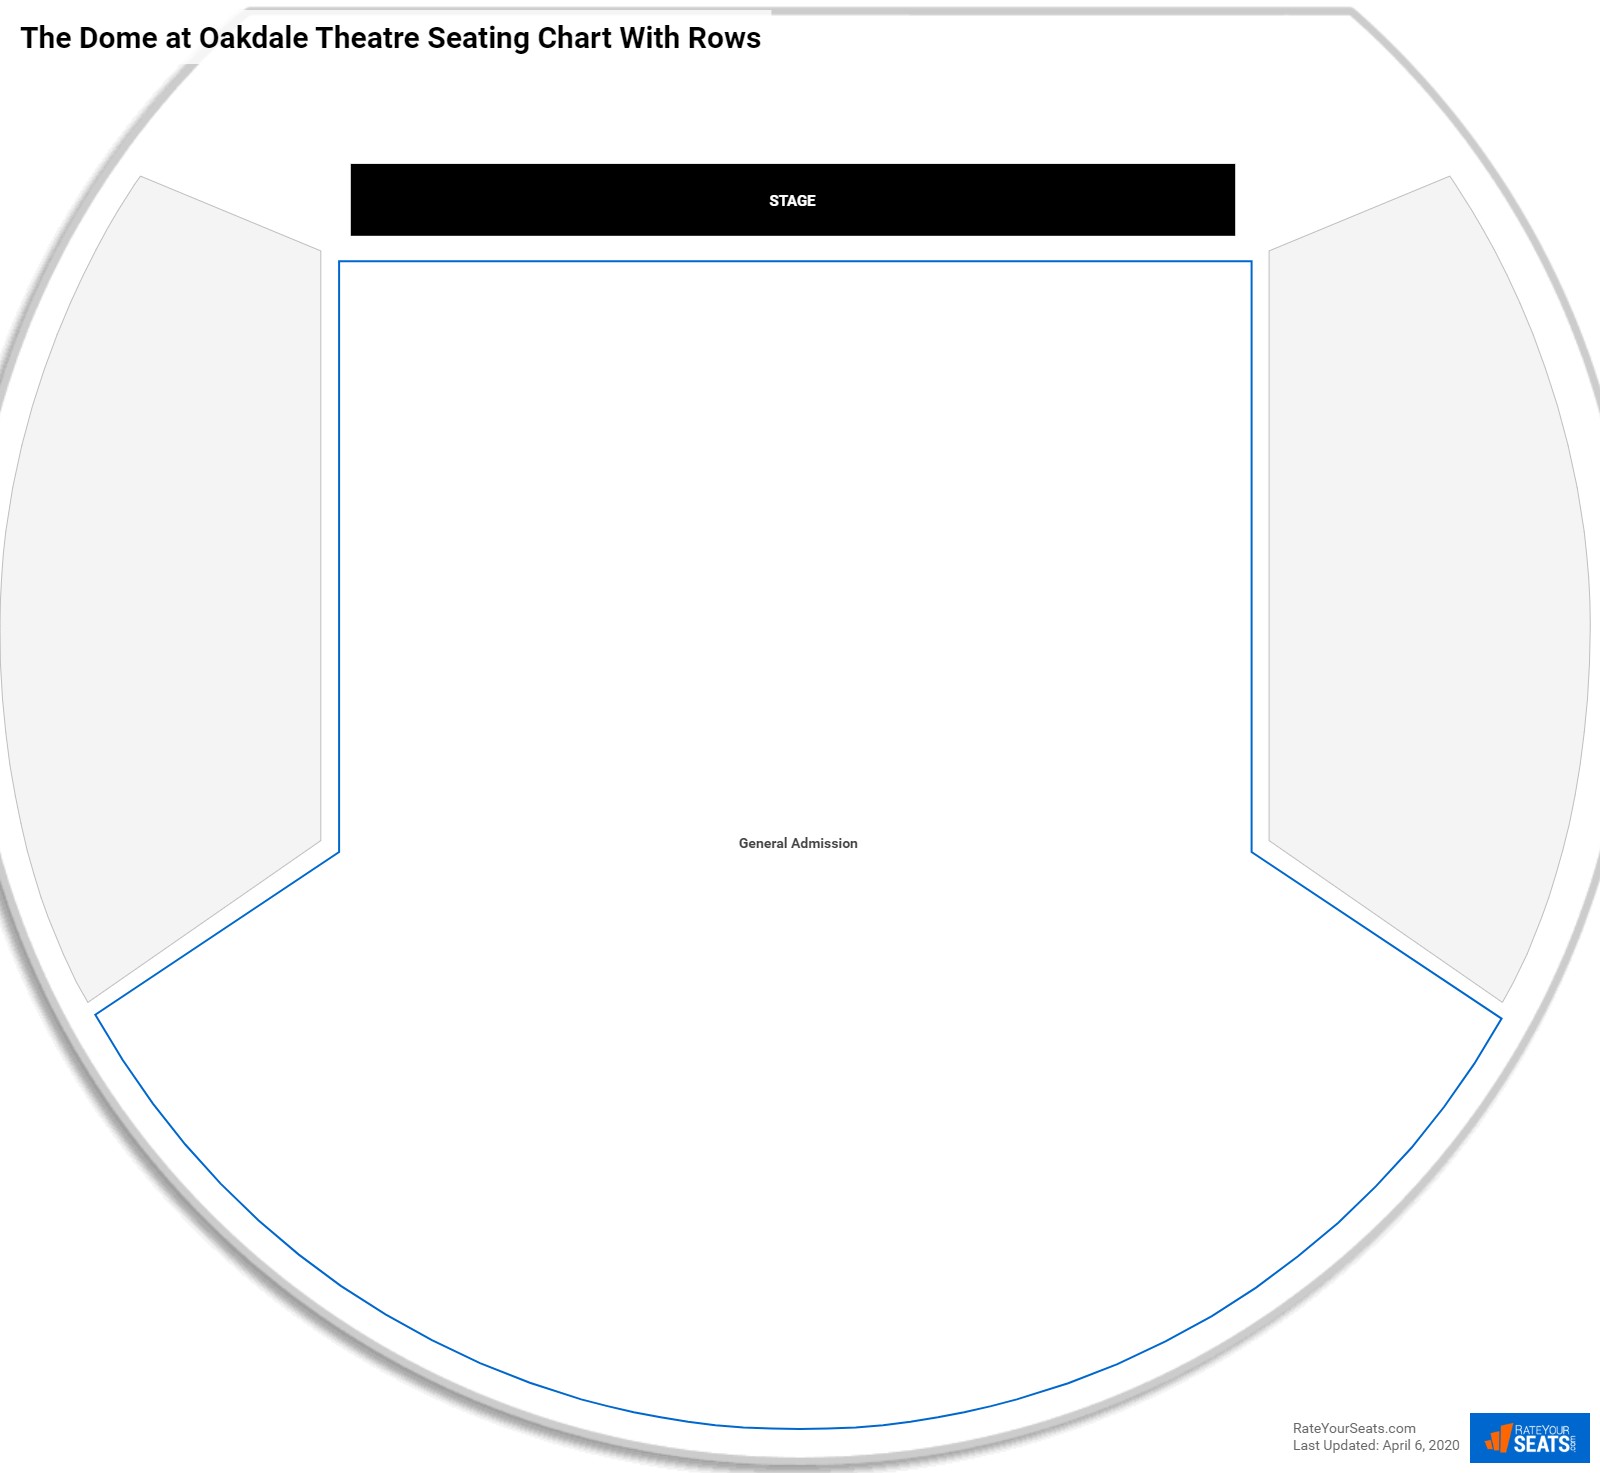 The Dome at Oakdale Theatre seating chart with row numbers